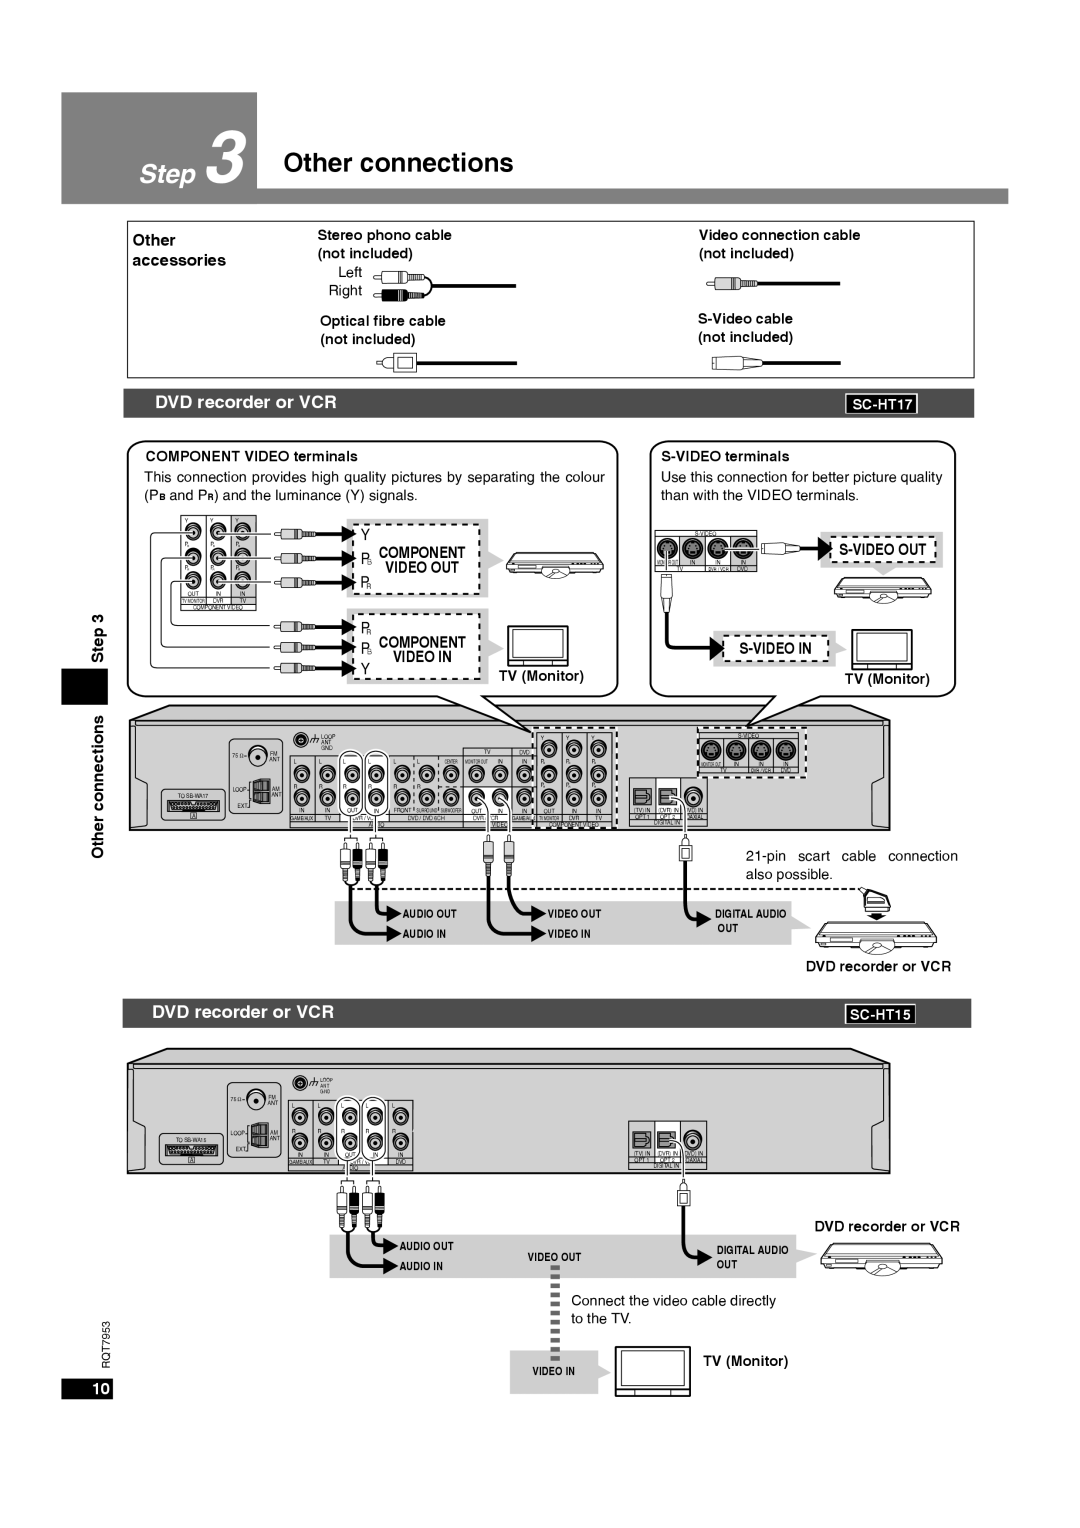 Panasonic SC-HT17 operating instructions Other connections, DVD recorder or VCR, SC-HT15 